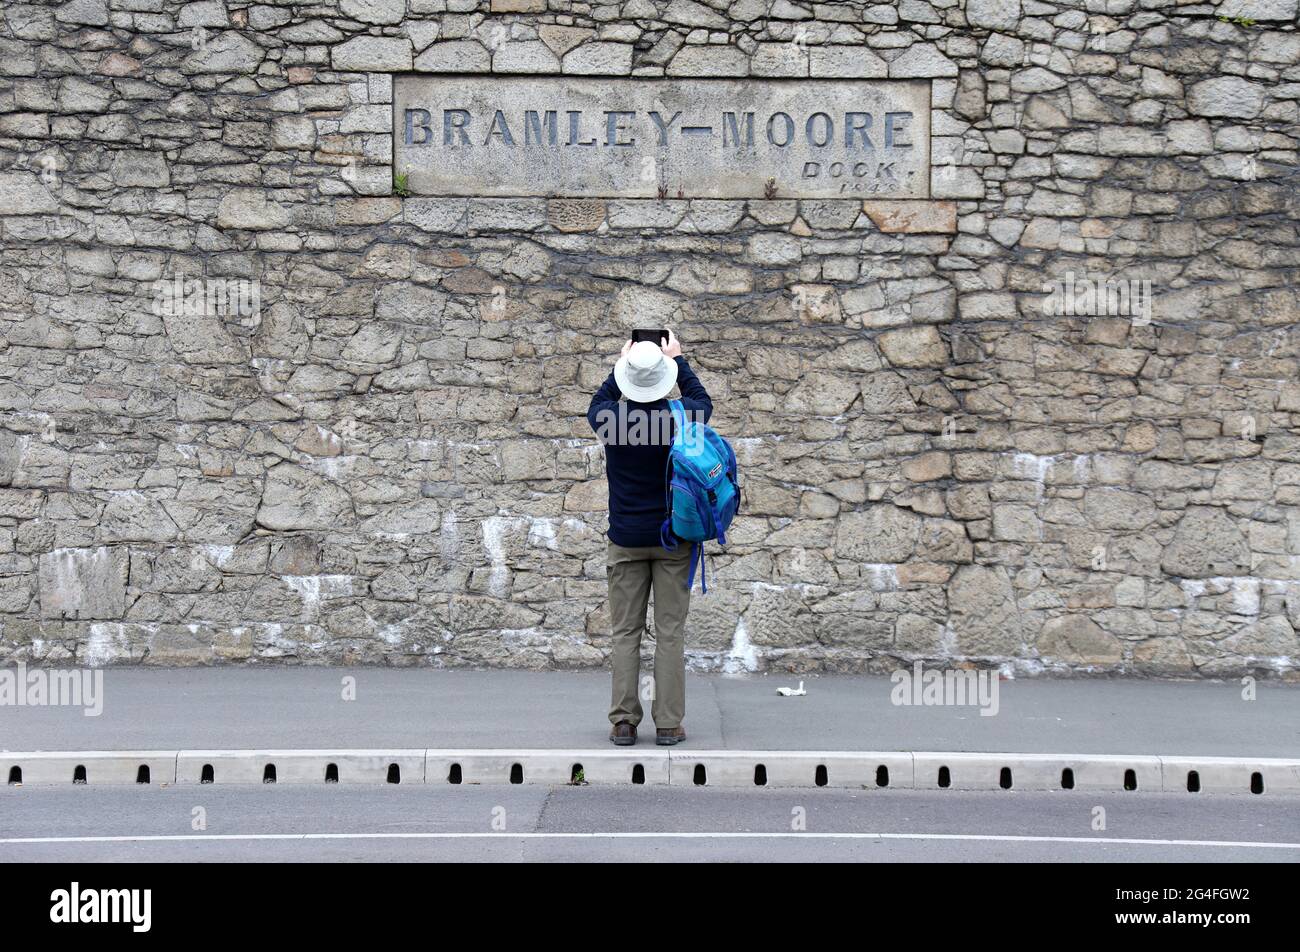 Tourist taking a photo of the Bramley Moore sign on the dock wall in Liverpool Stock Photo